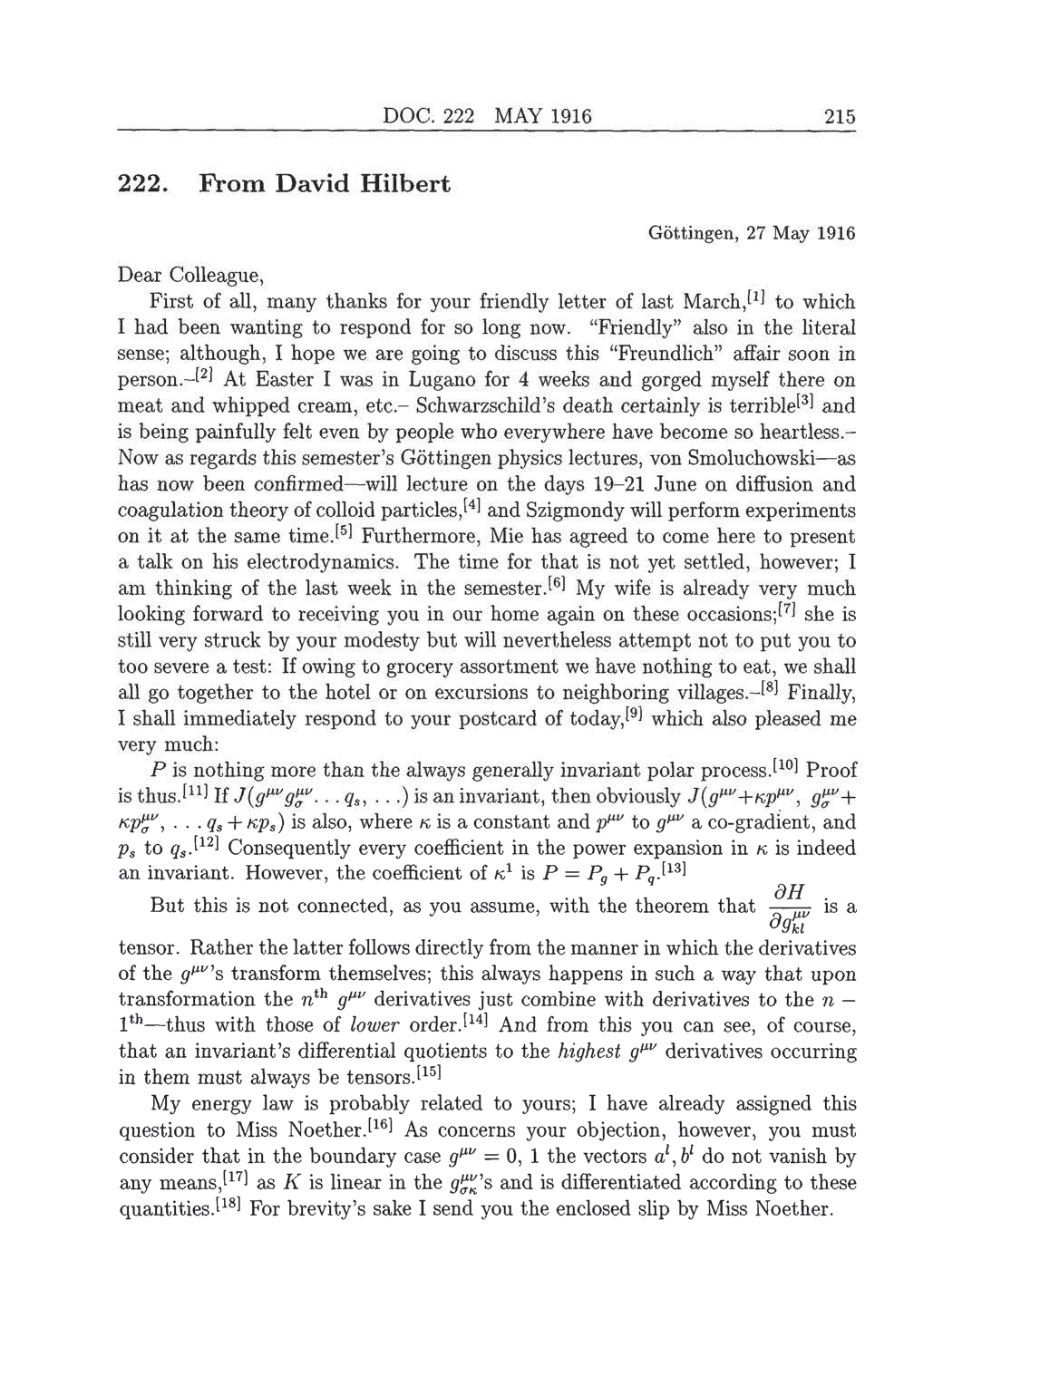 Volume 8: The Berlin Years: Correspondence, 1914-1918 (English translation supplement) page 215